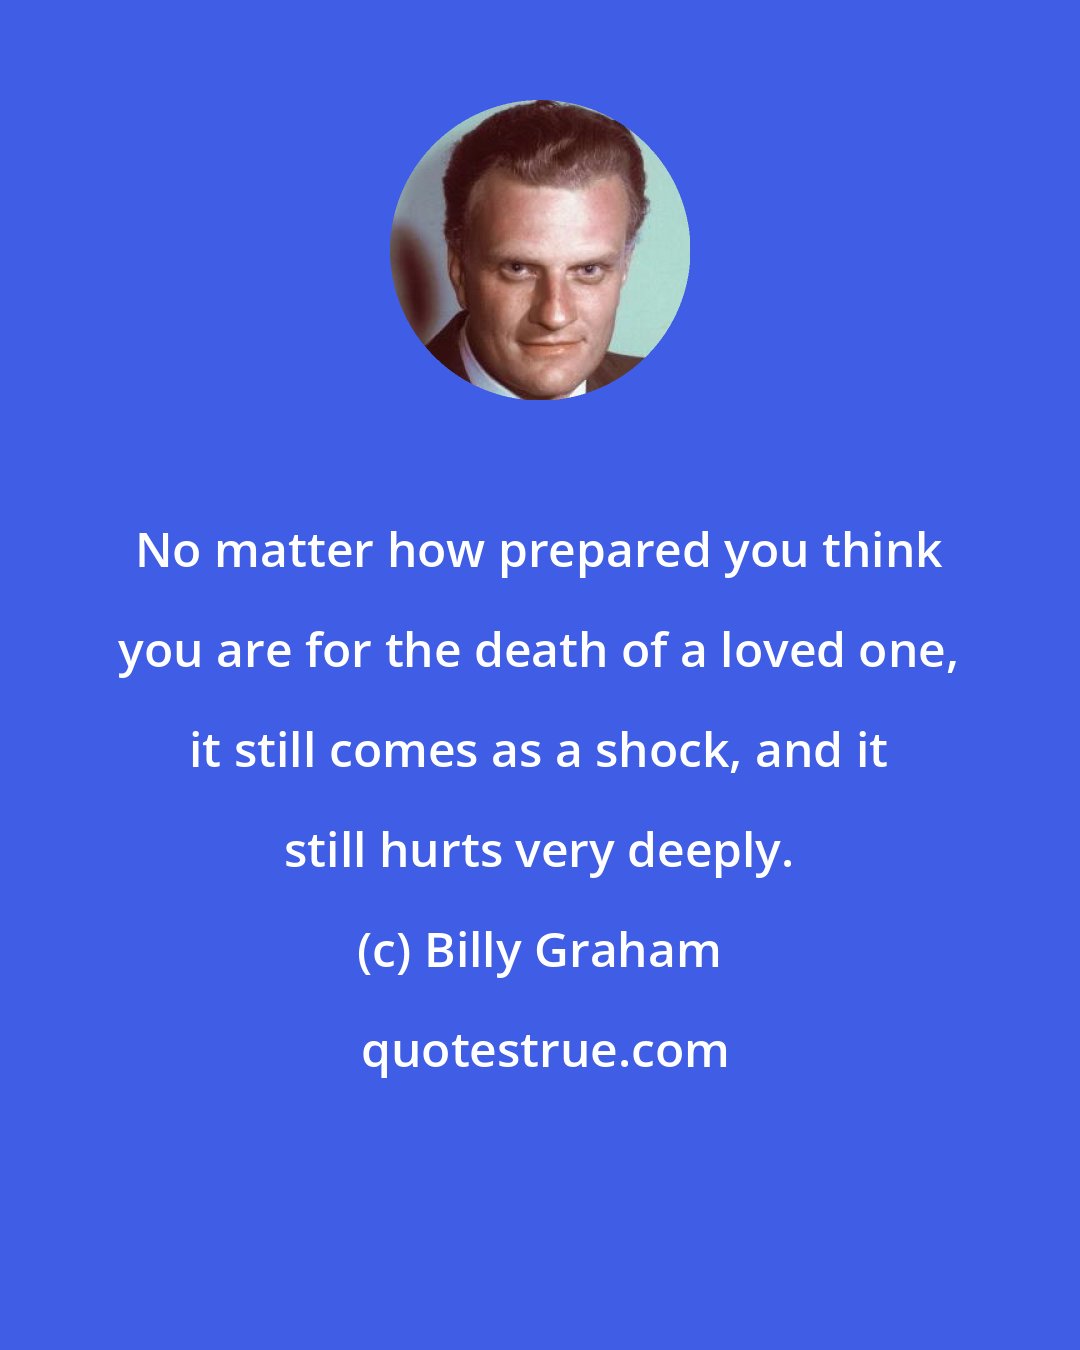 Billy Graham: No matter how prepared you think you are for the death of a loved one, it still comes as a shock, and it still hurts very deeply.